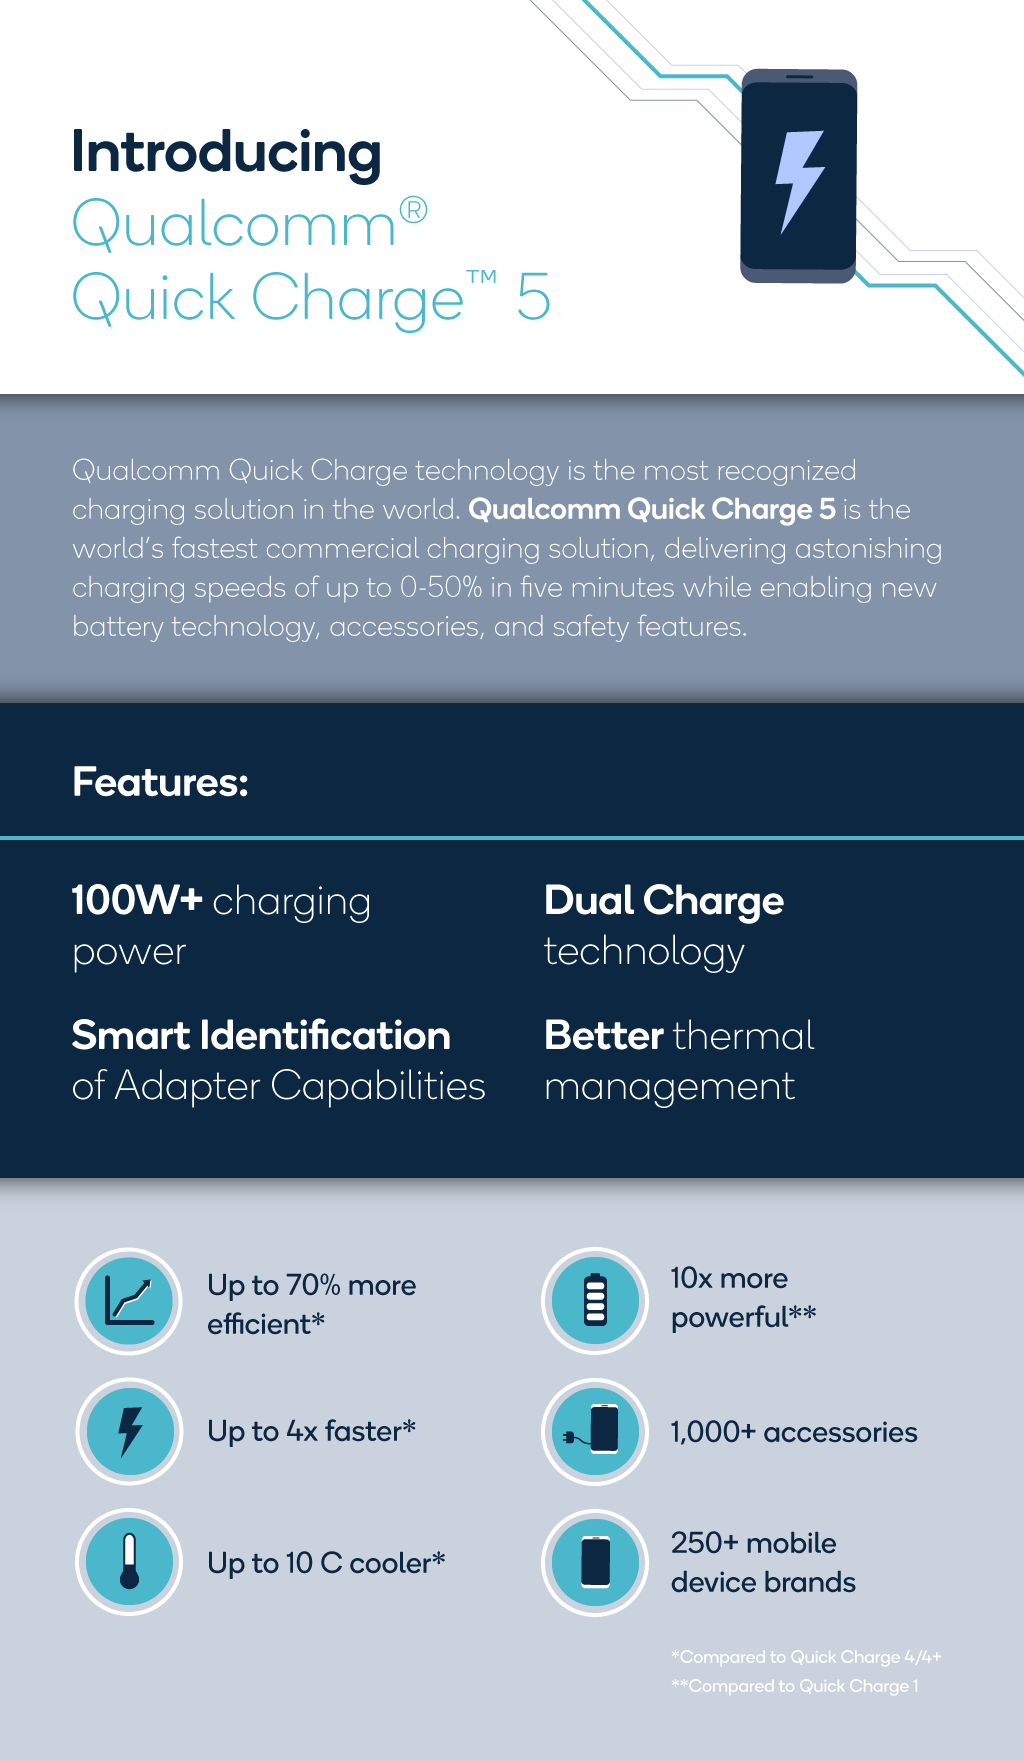 Deep dive into Qualcomm Quick Charge 5 and other Quick Charge news qc_quickcharge5_infographic_final_v2.png